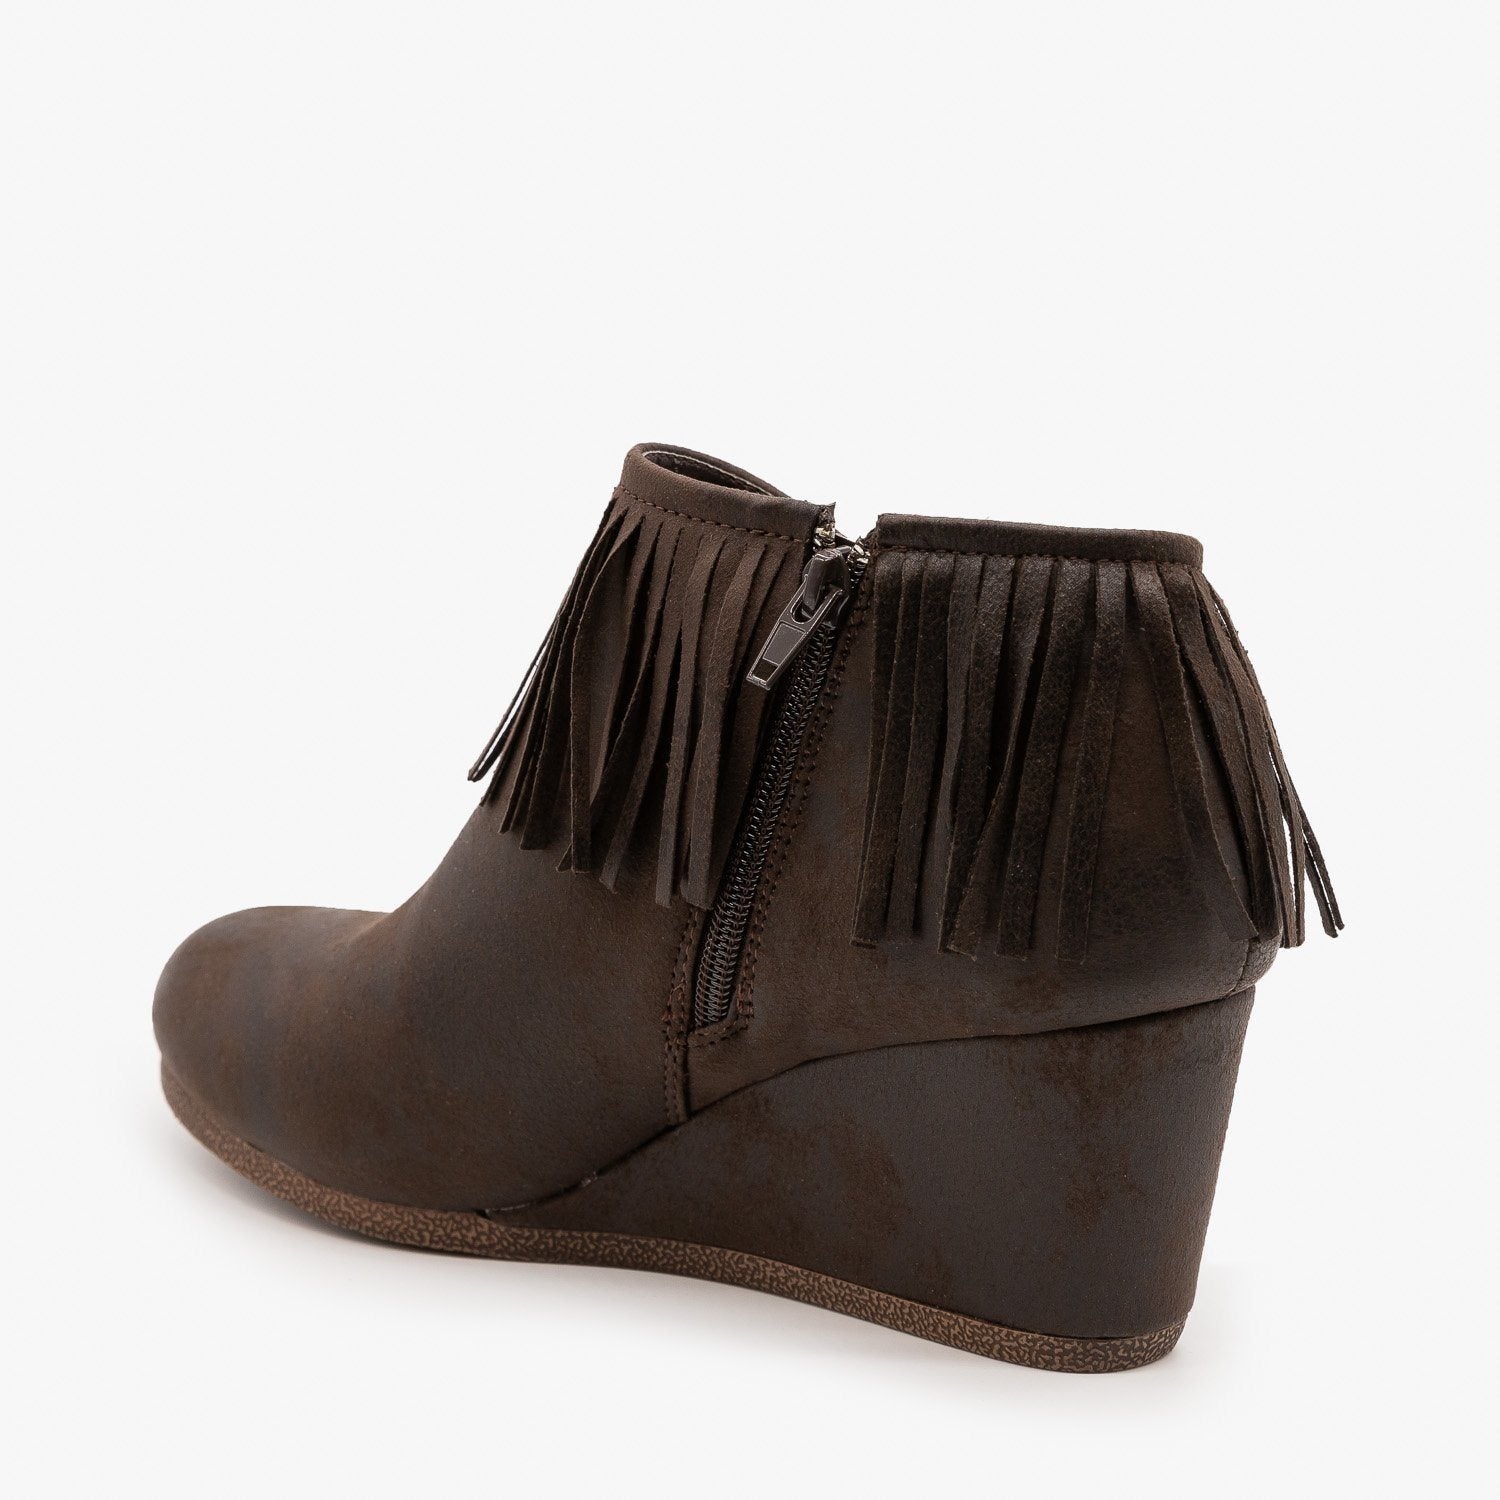 wedge booties with fringe